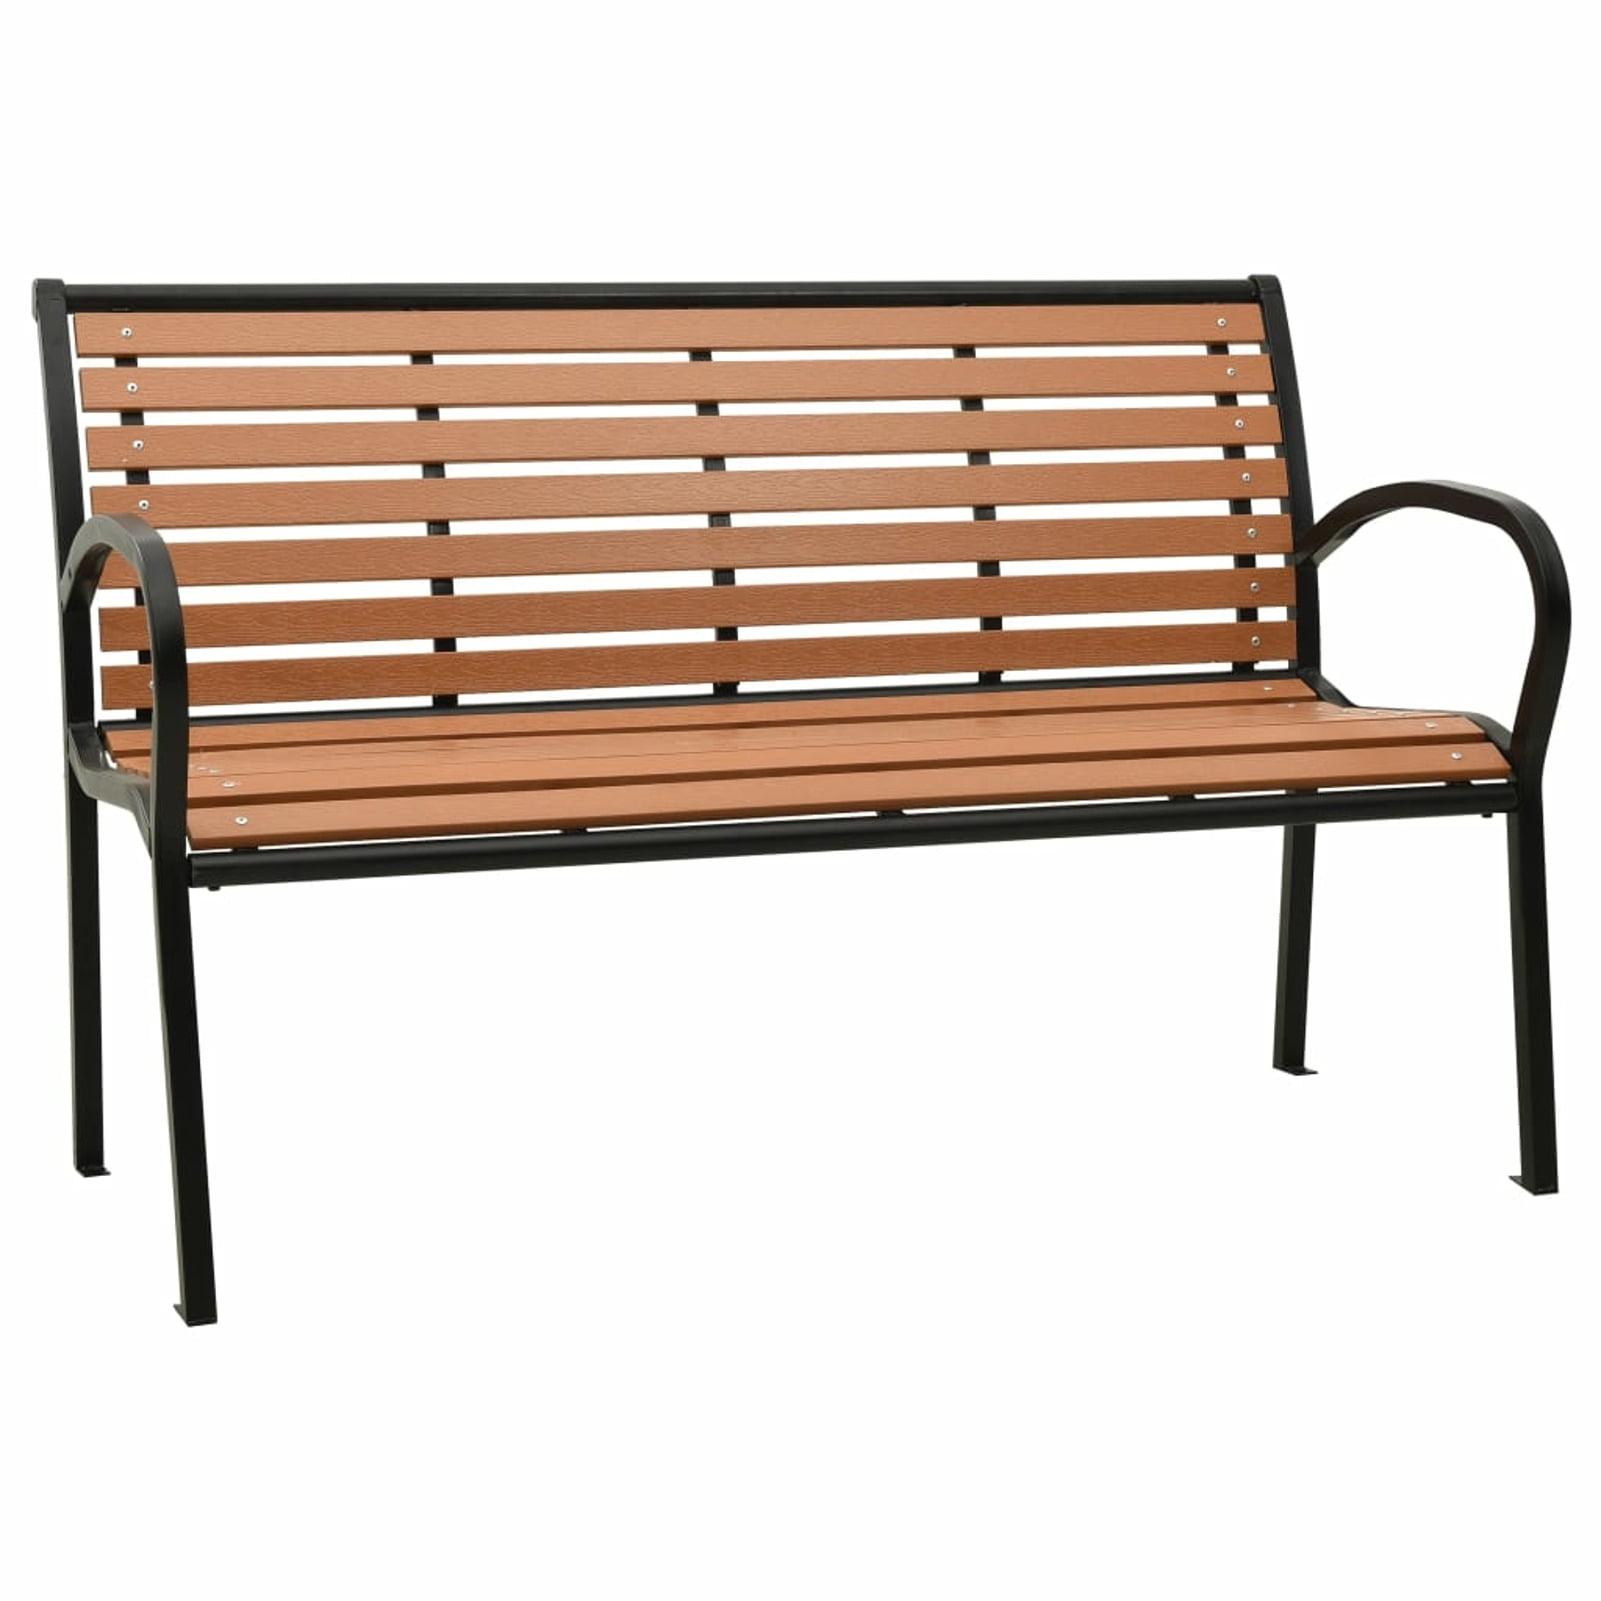 49.2" Black and Brown Steel and WPC Patio Bench